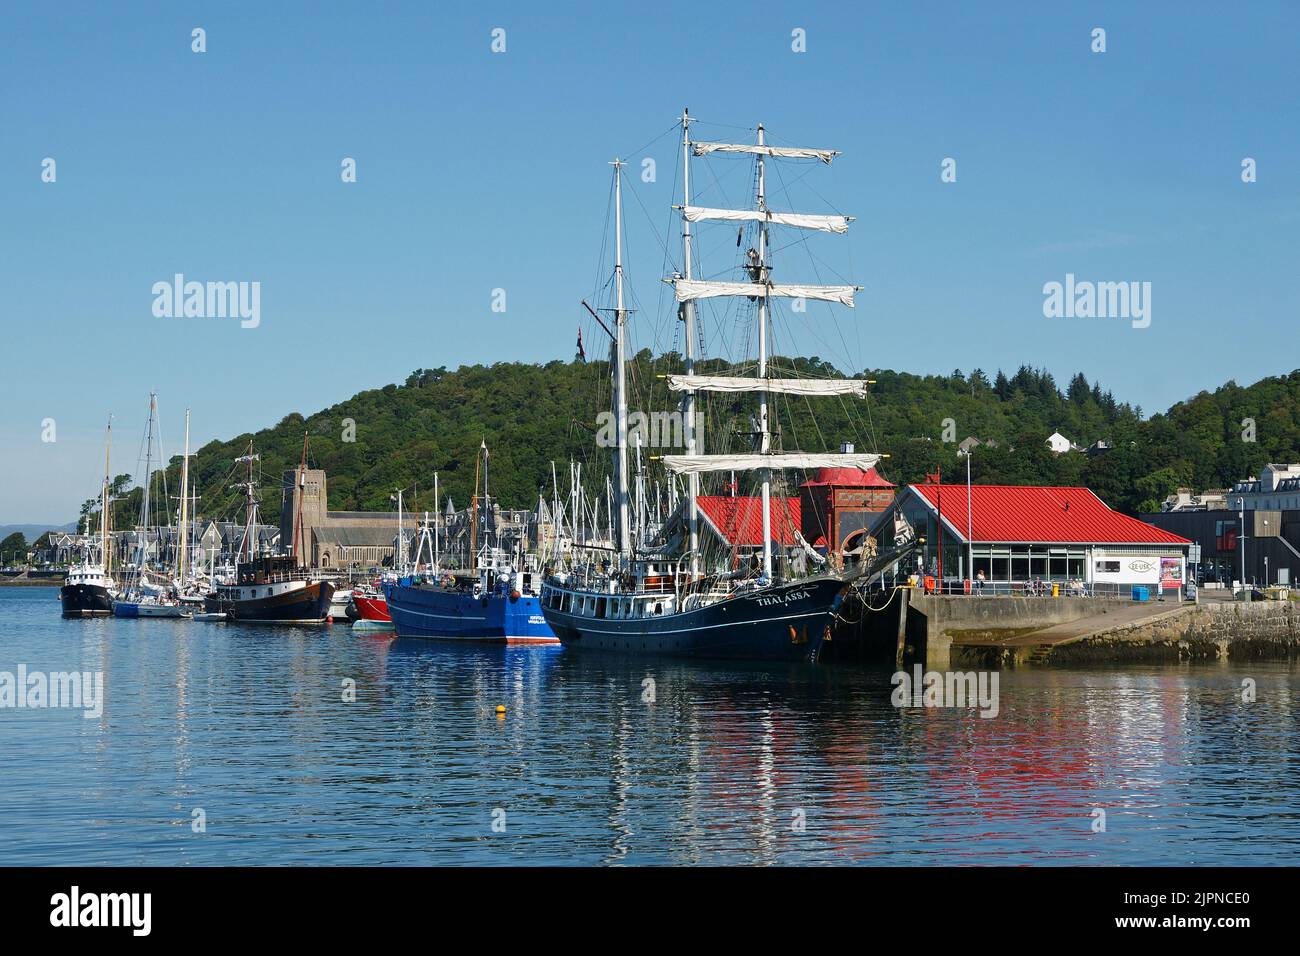 Dutch-registered tall ship Thalassa alongside the North Pier, Oban Harbout, Argyll and Bute, Scotland. Stock Photo